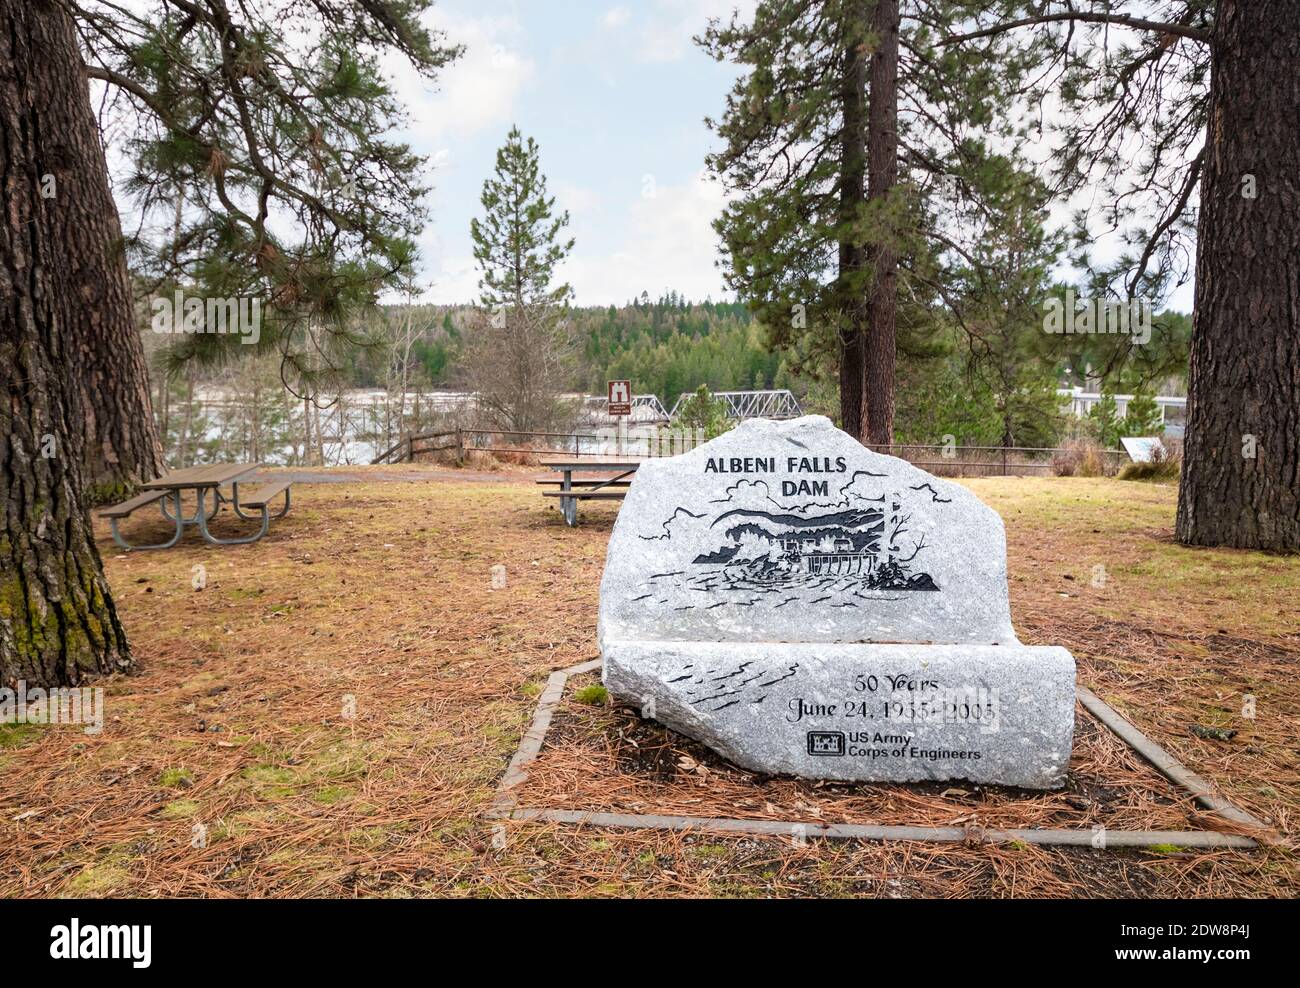 A commemorative boulder representing 50 years of the Albeni Falls dam on the Priest River, near Oldtown and Priest River Idaho, USA. Stock Photo